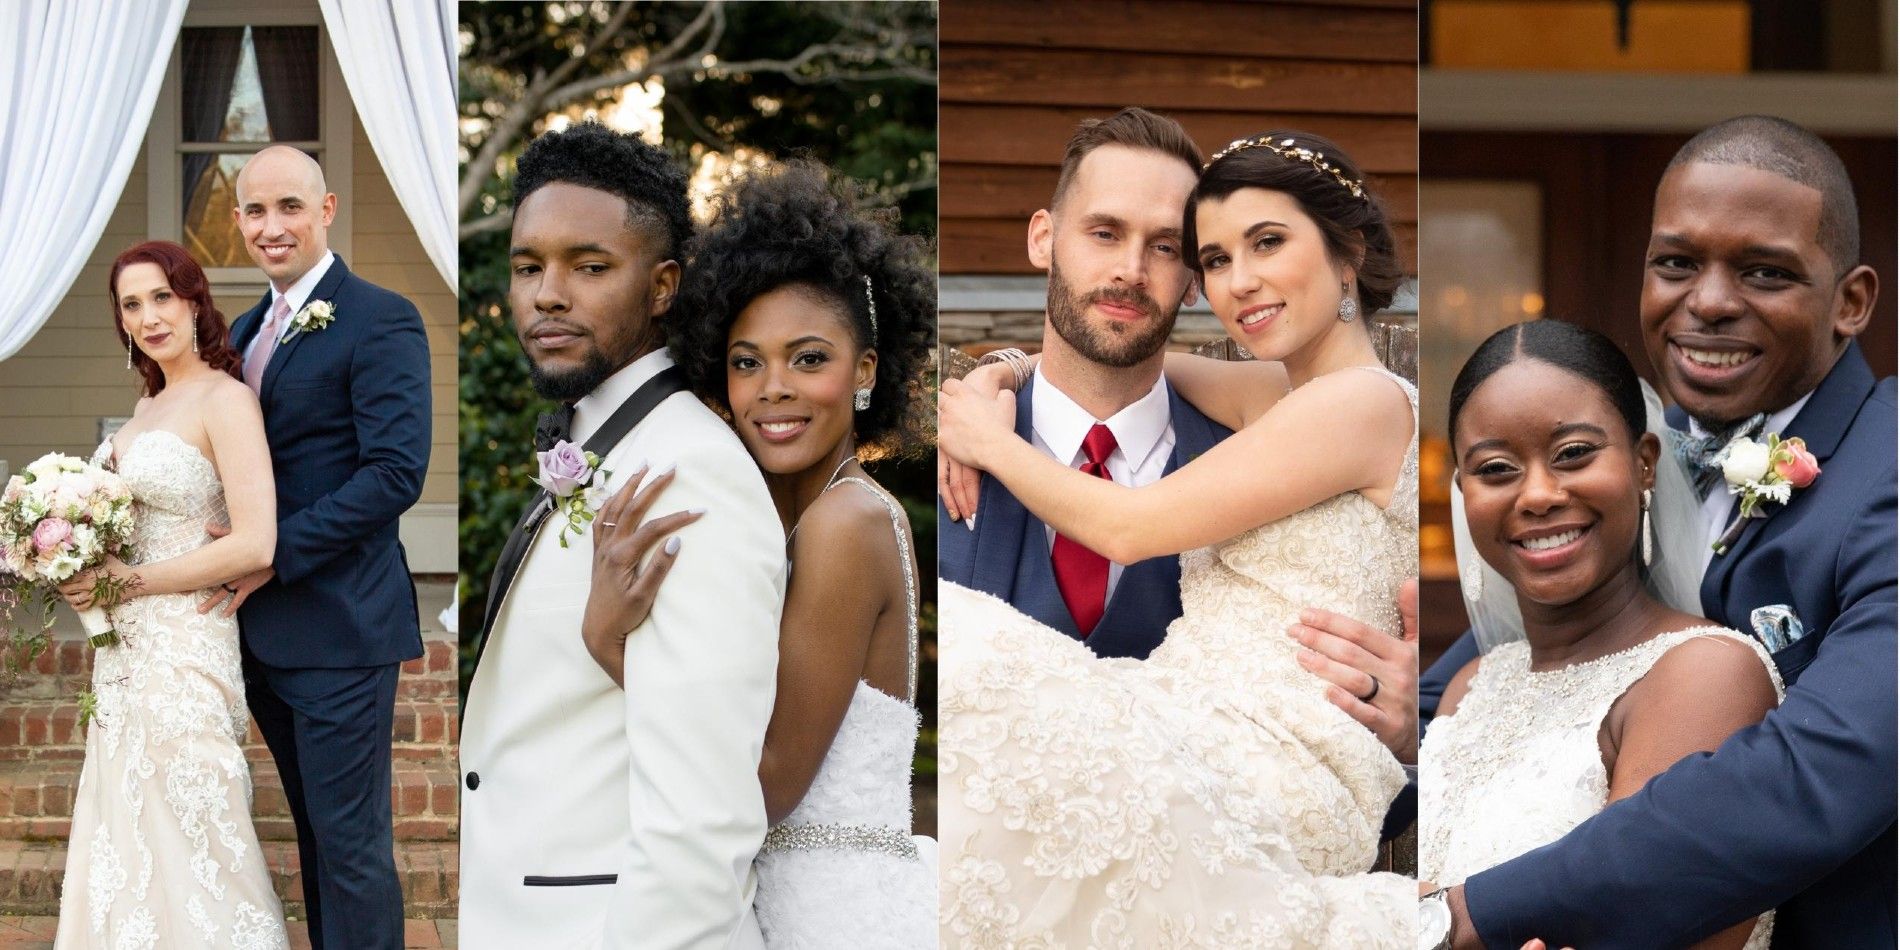 married at first sight season 9 couples